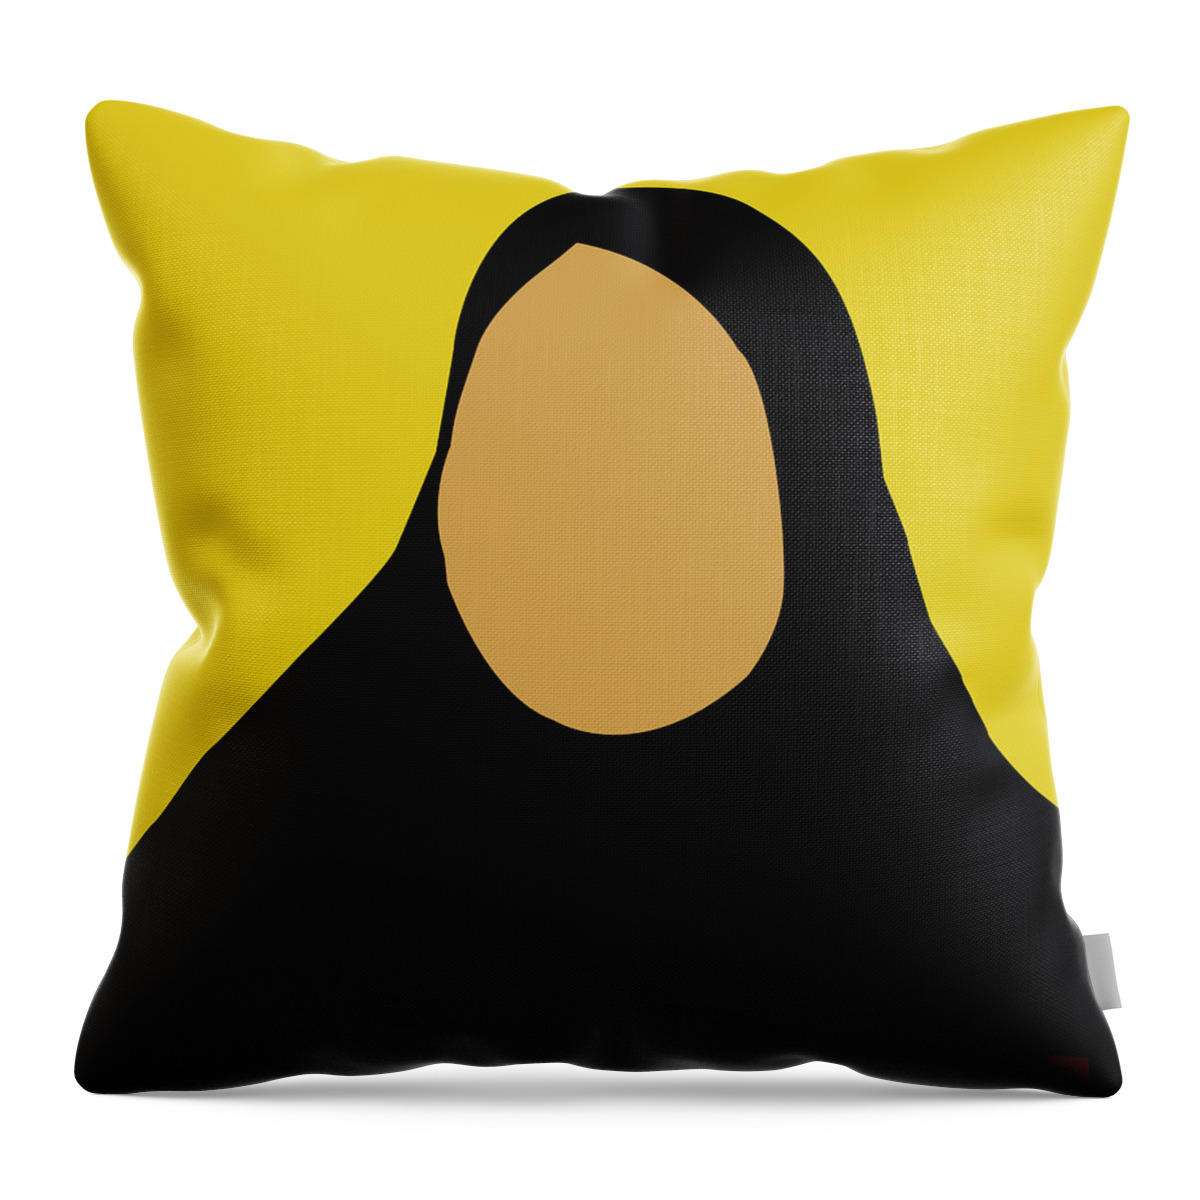 Islam Throw Pillow featuring the digital art Ukhti by Scheme Of Things Graphics